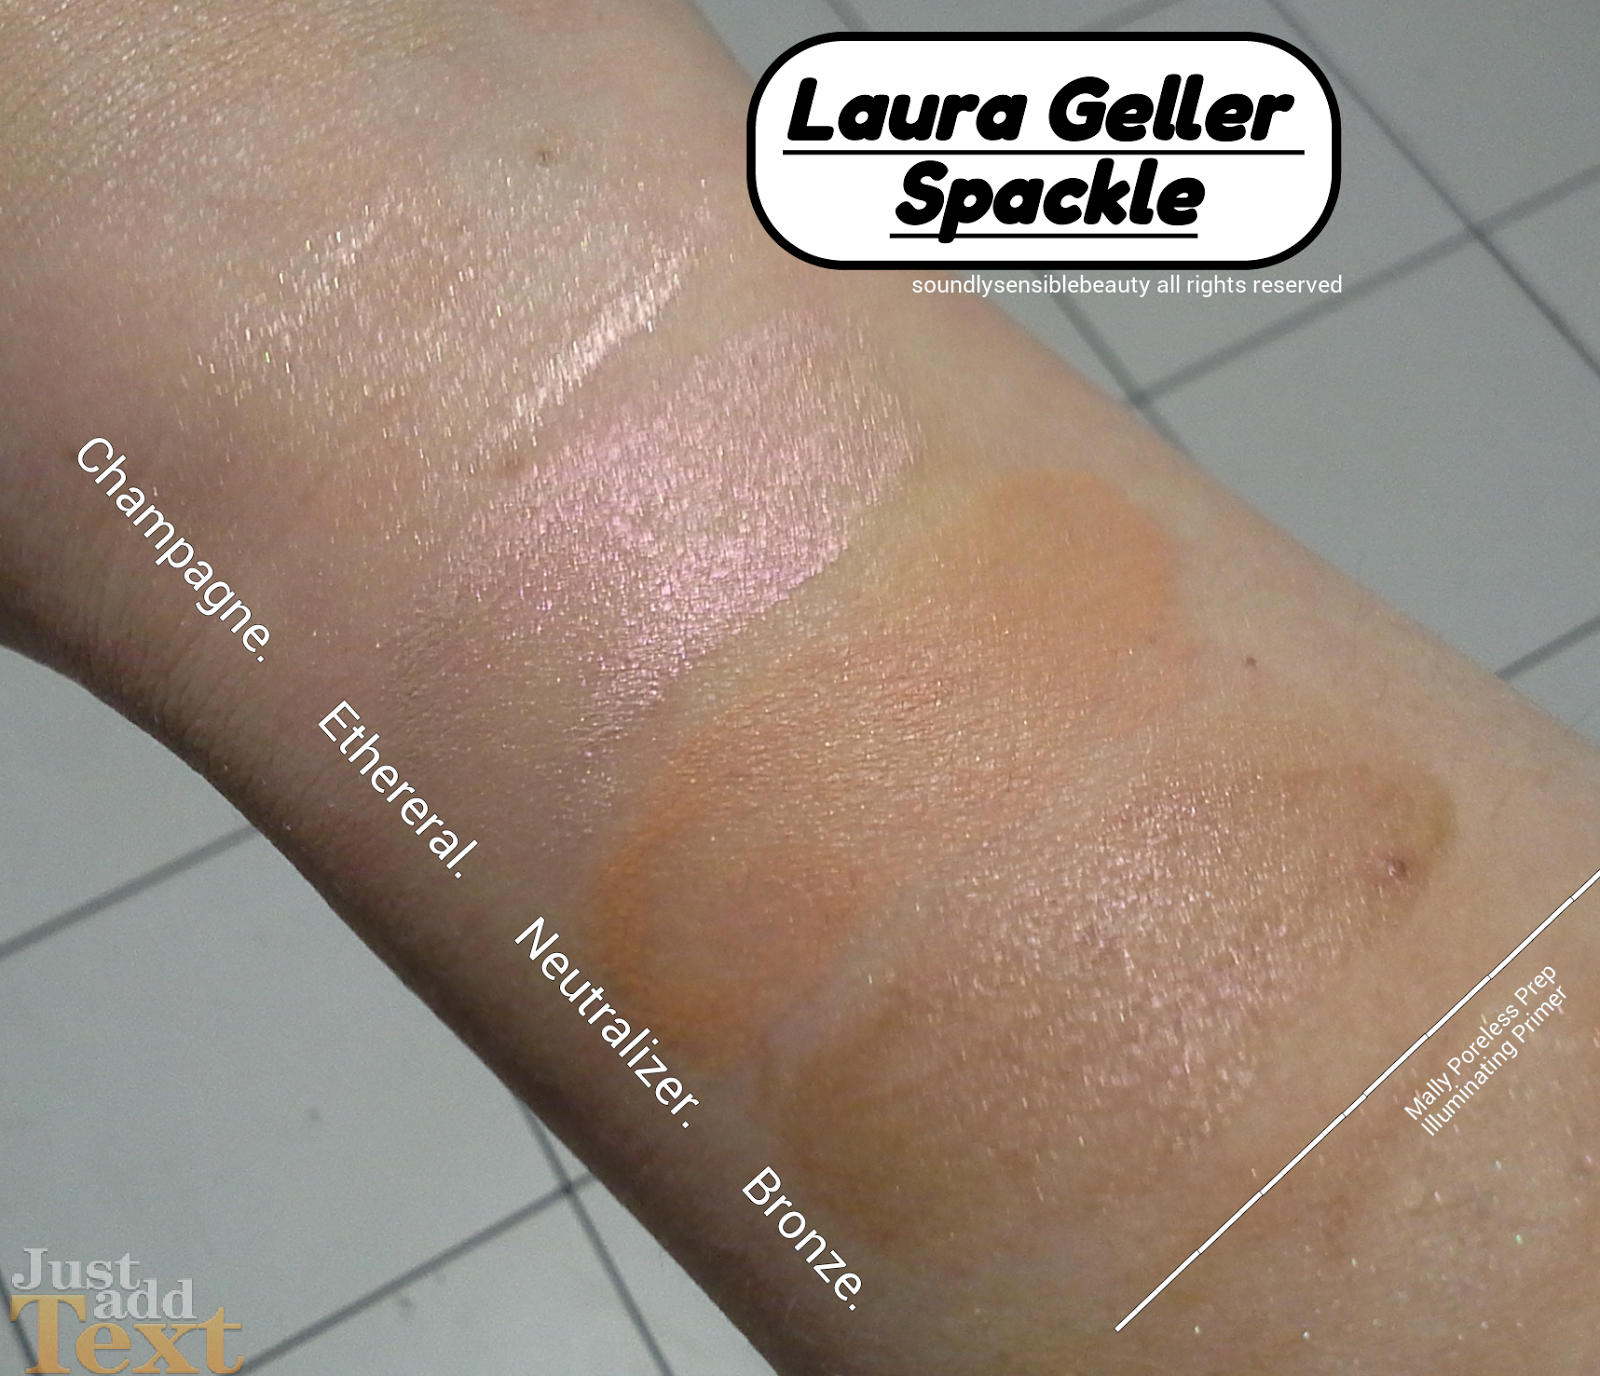 Laura Geller Spackle; Review & Swatches